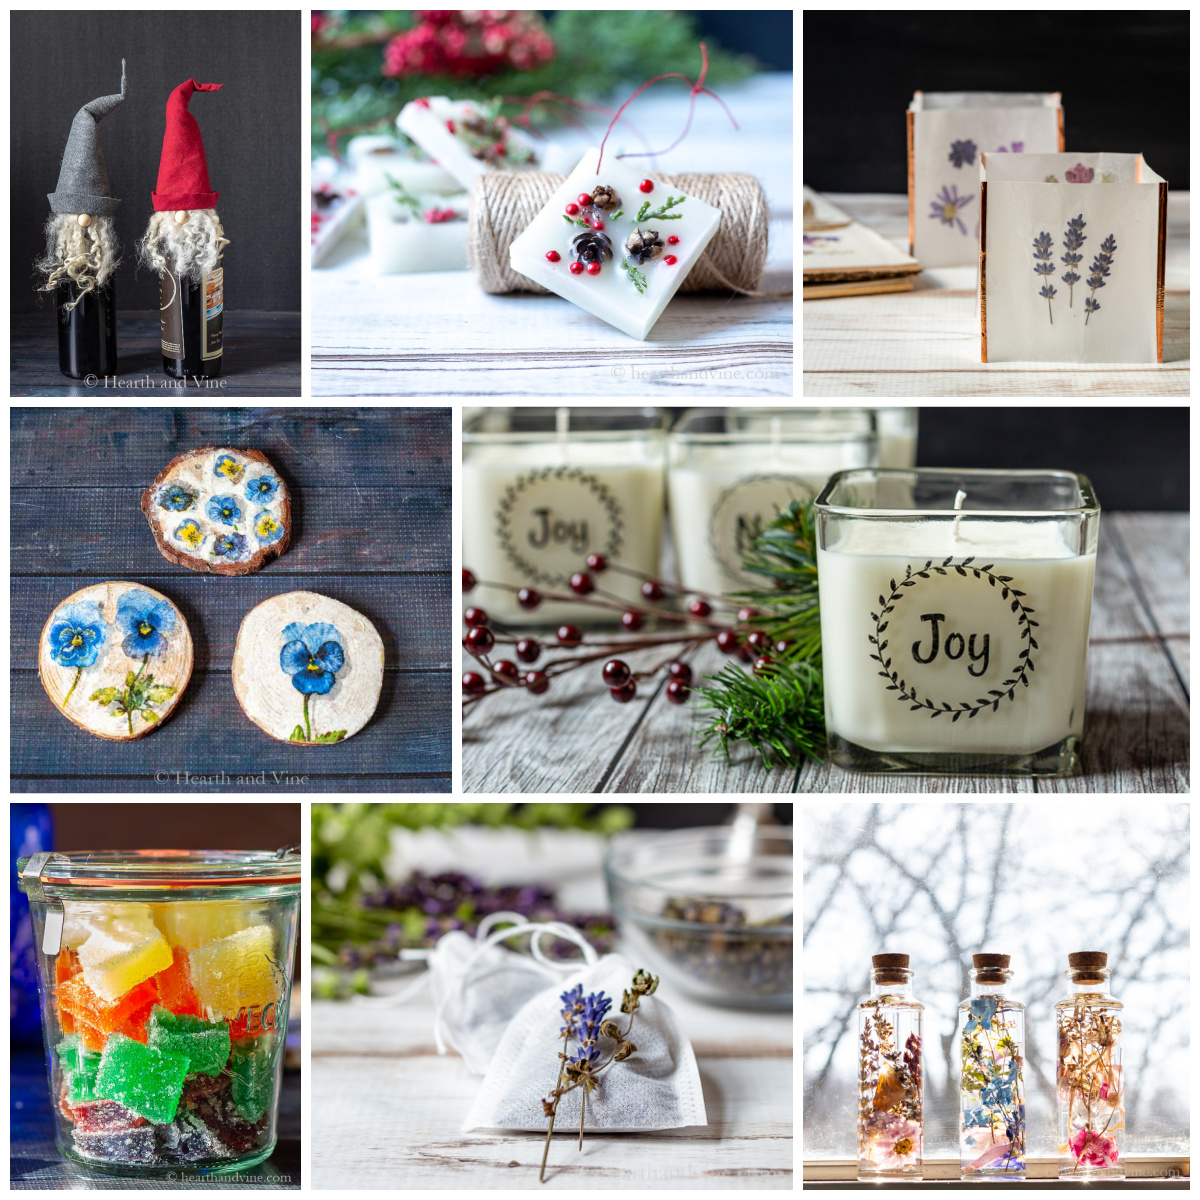 A collage of homemade holiday gifts including coasters, jelly candy, candles, pressed flower gifts and more.